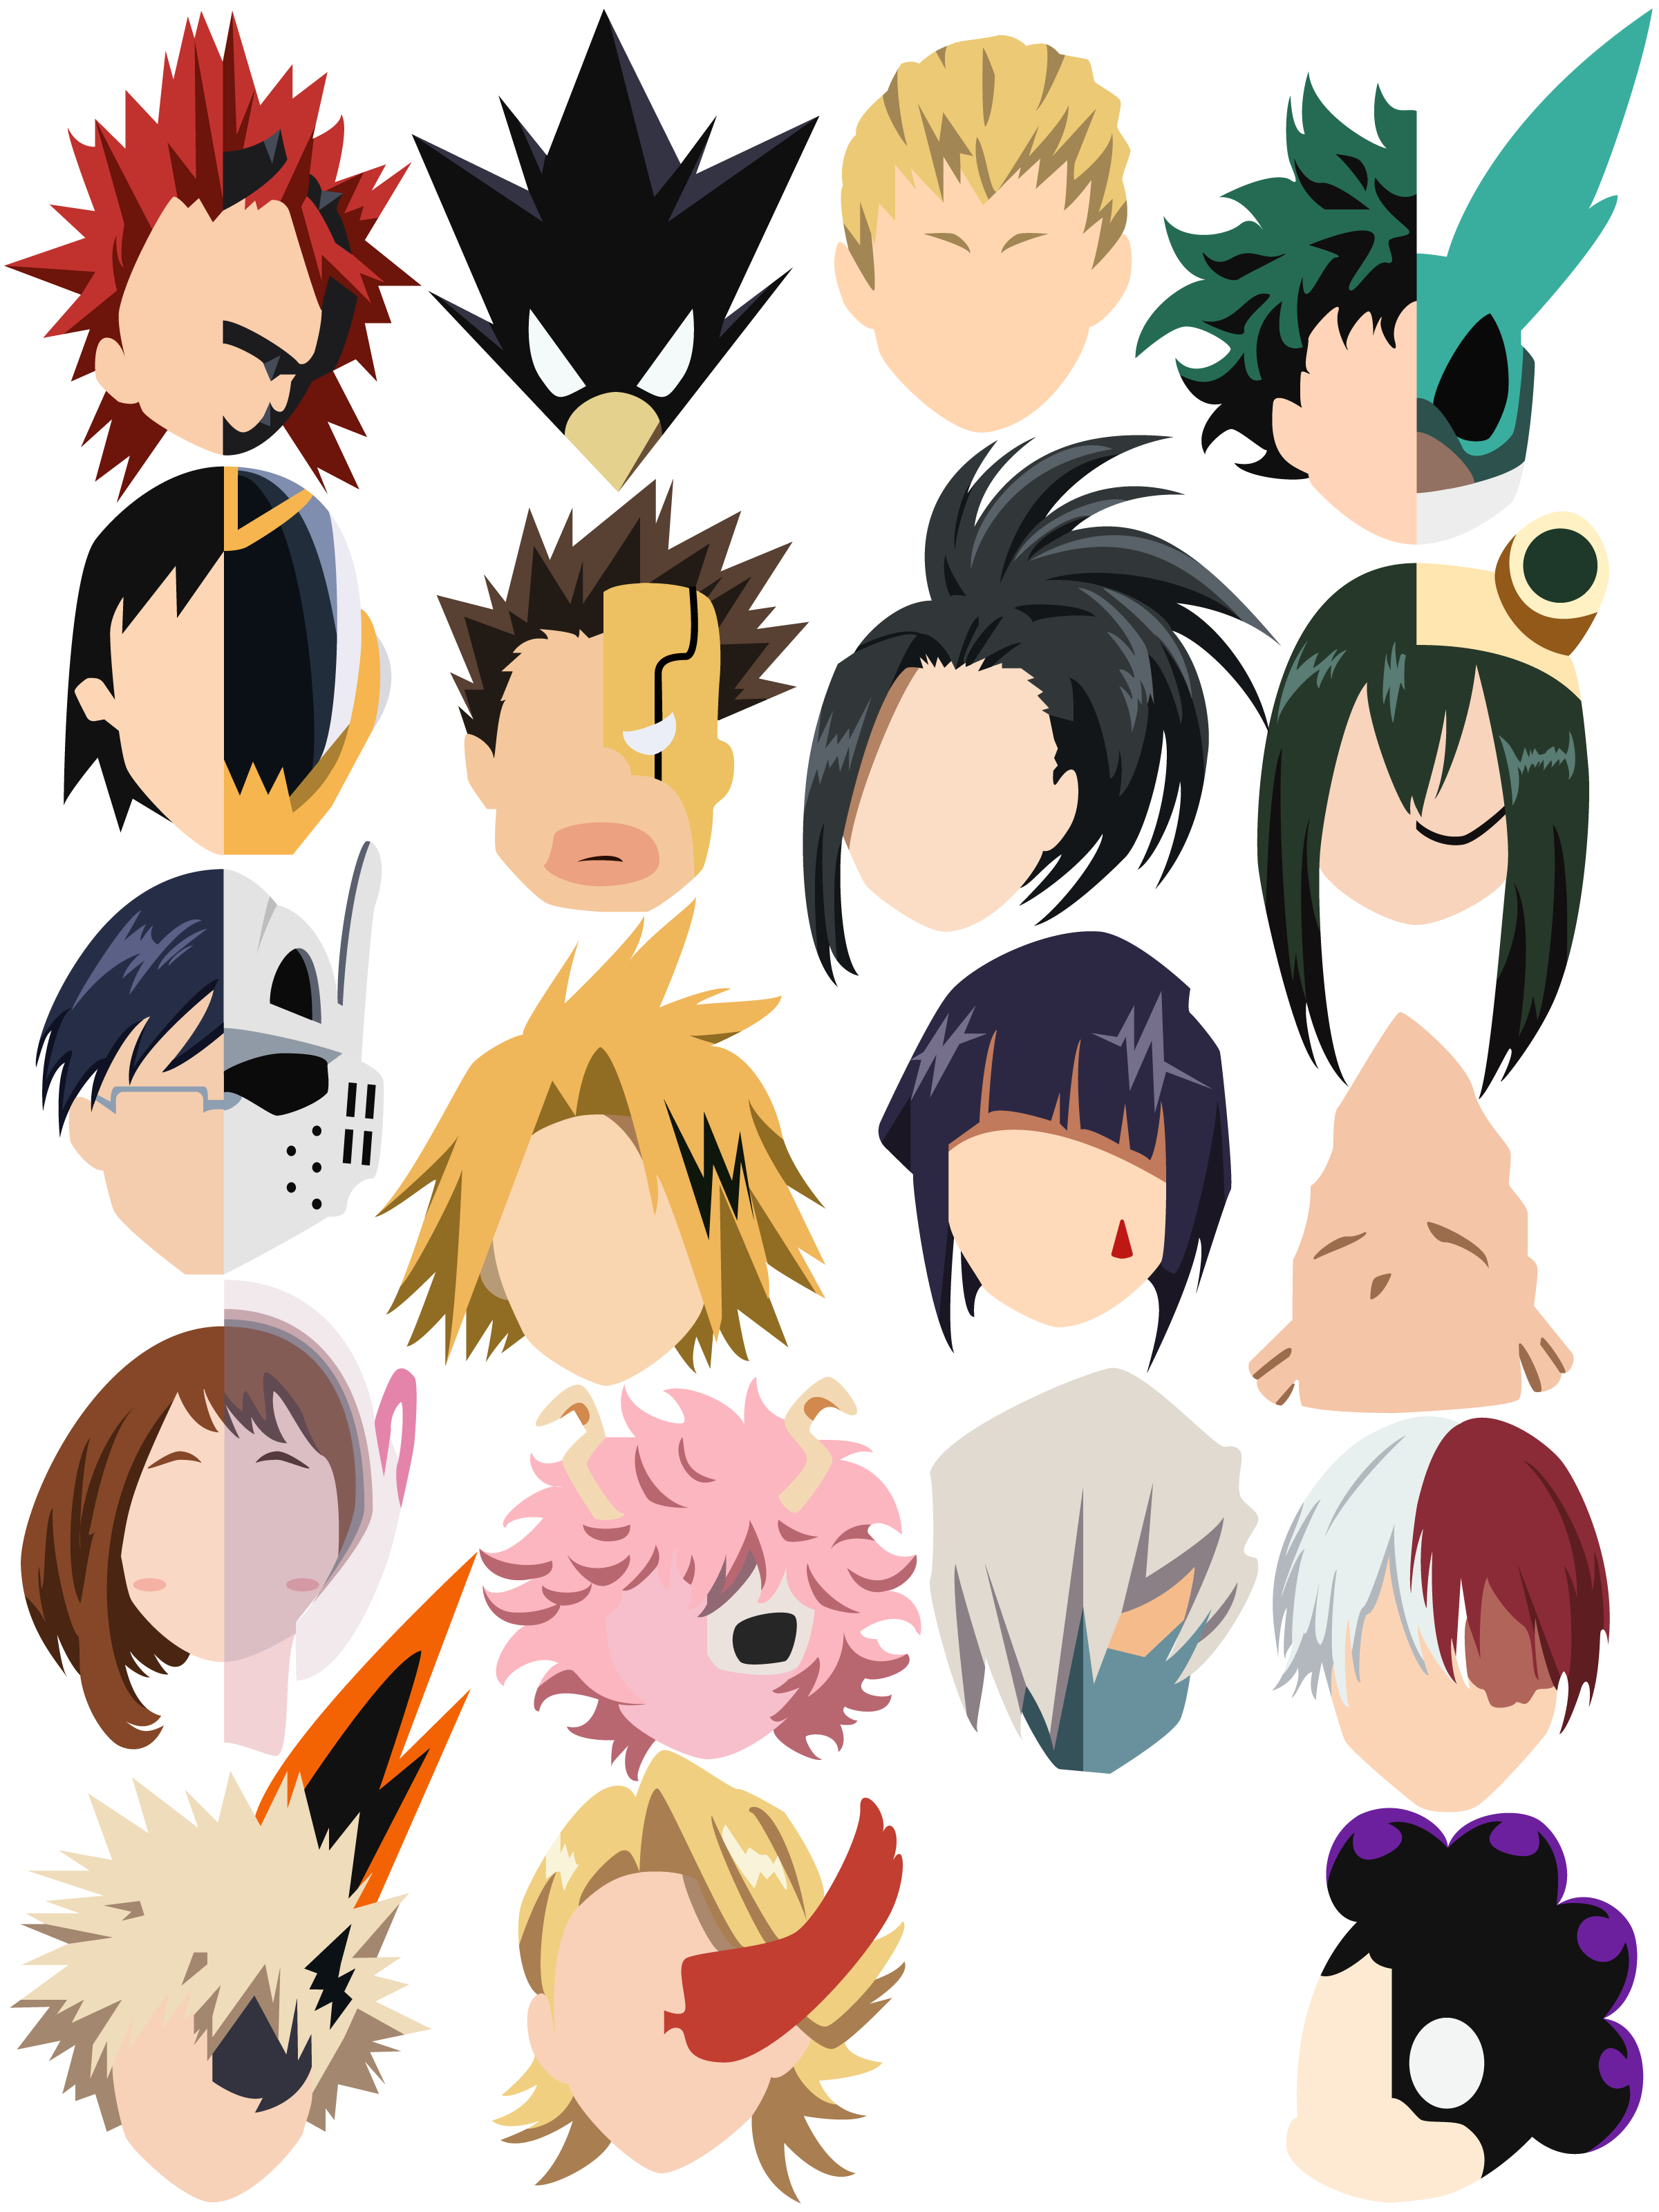 Best R BokuNoHeroAcademia Image On Pholder. What Do You